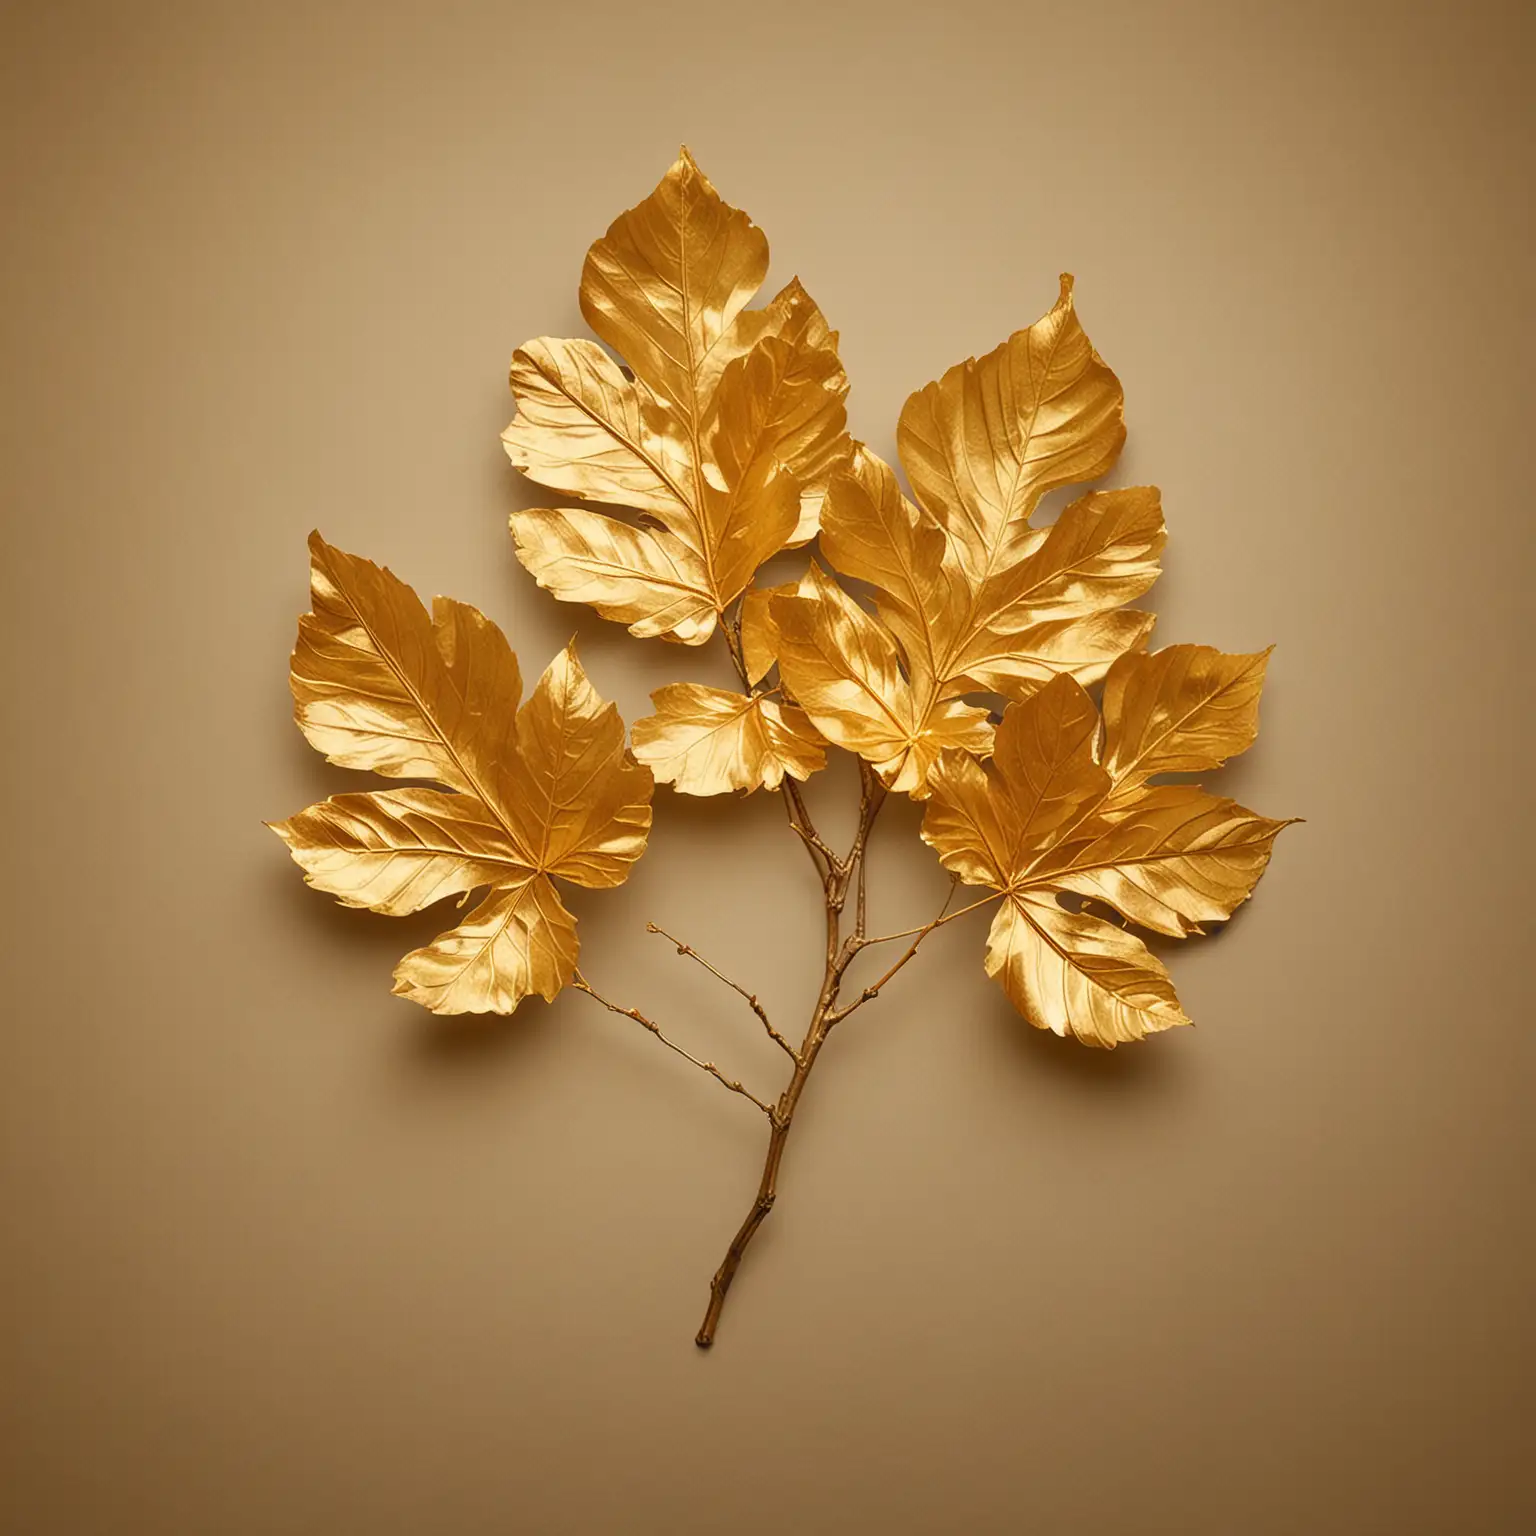 a few large gold leaves om branch on black a d gold background